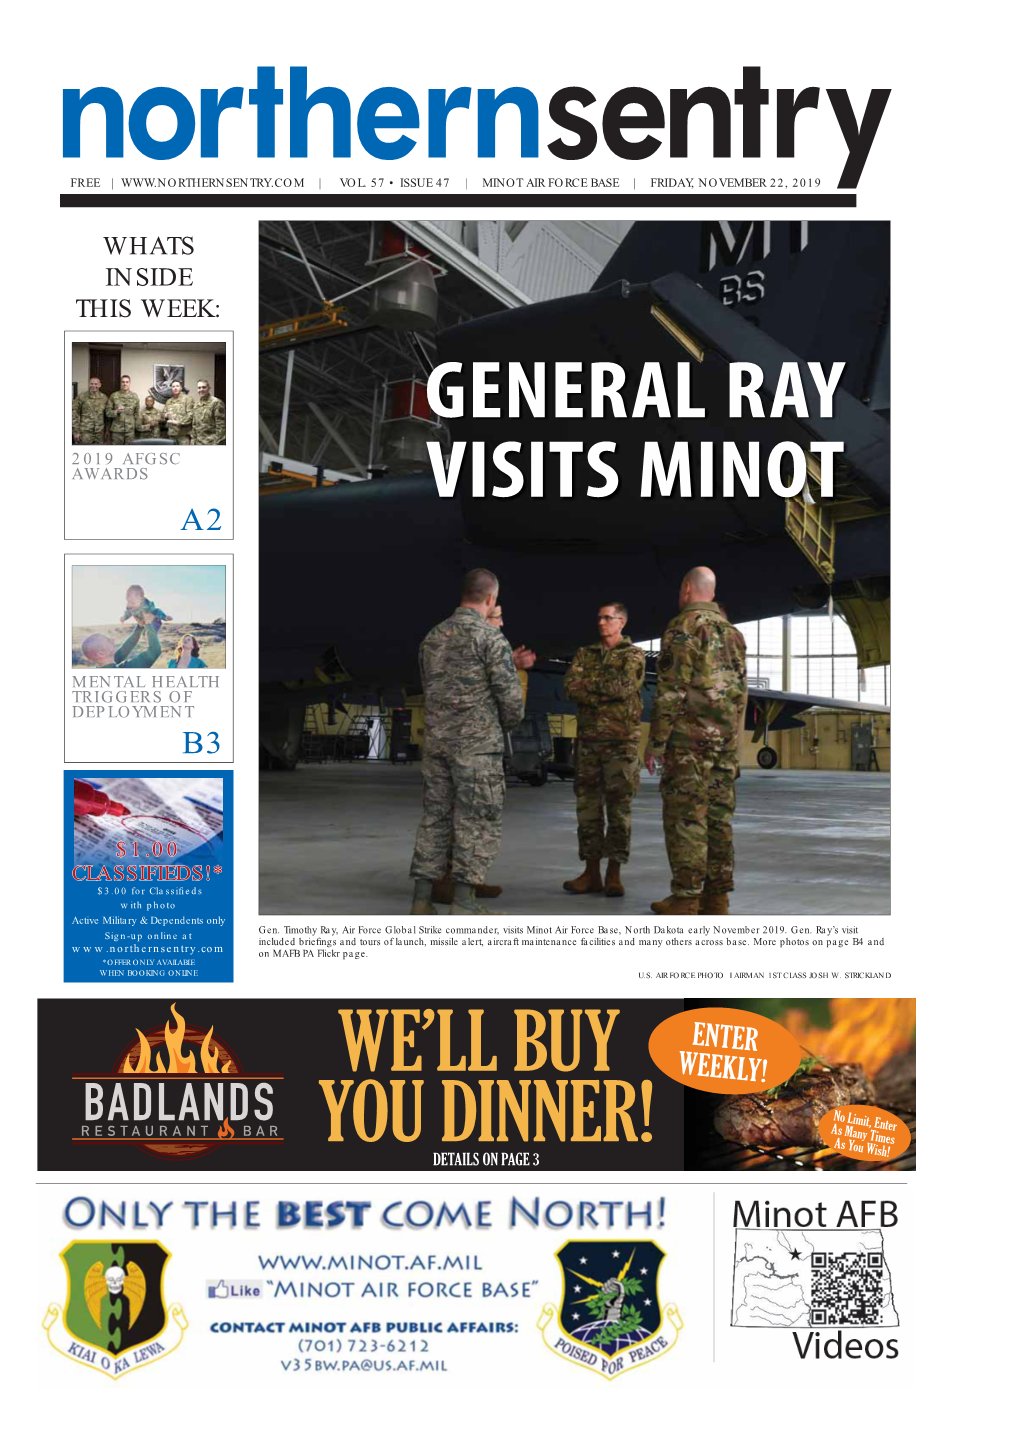 Whats Inside This Week: General Ray